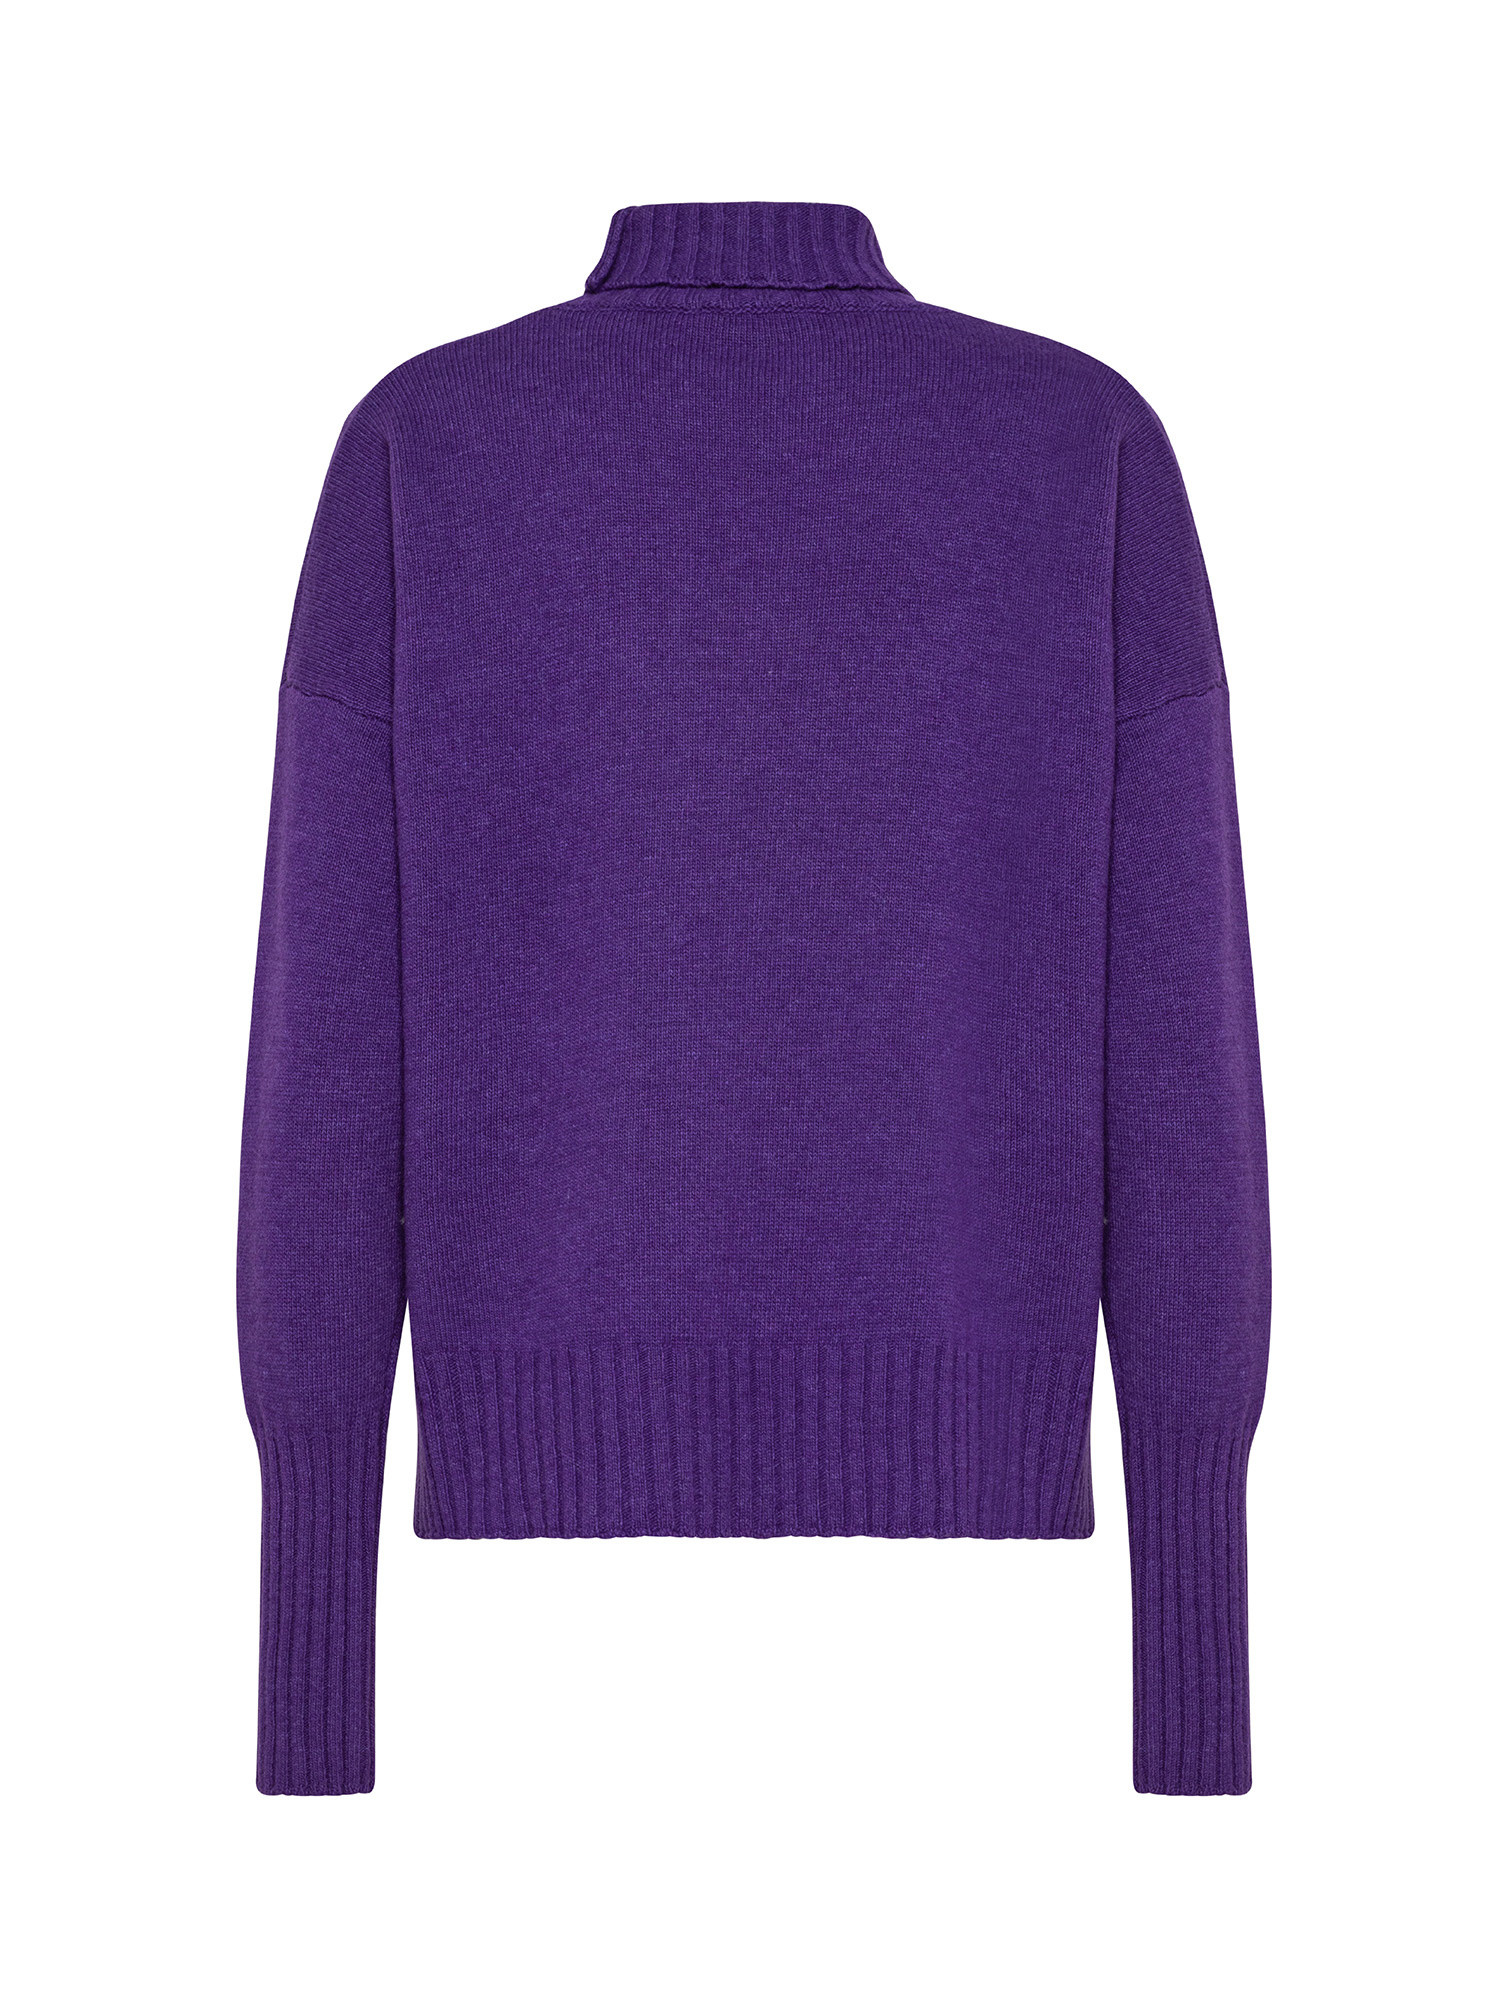 K Collection - Crater neck sweater, Purple, large image number 1